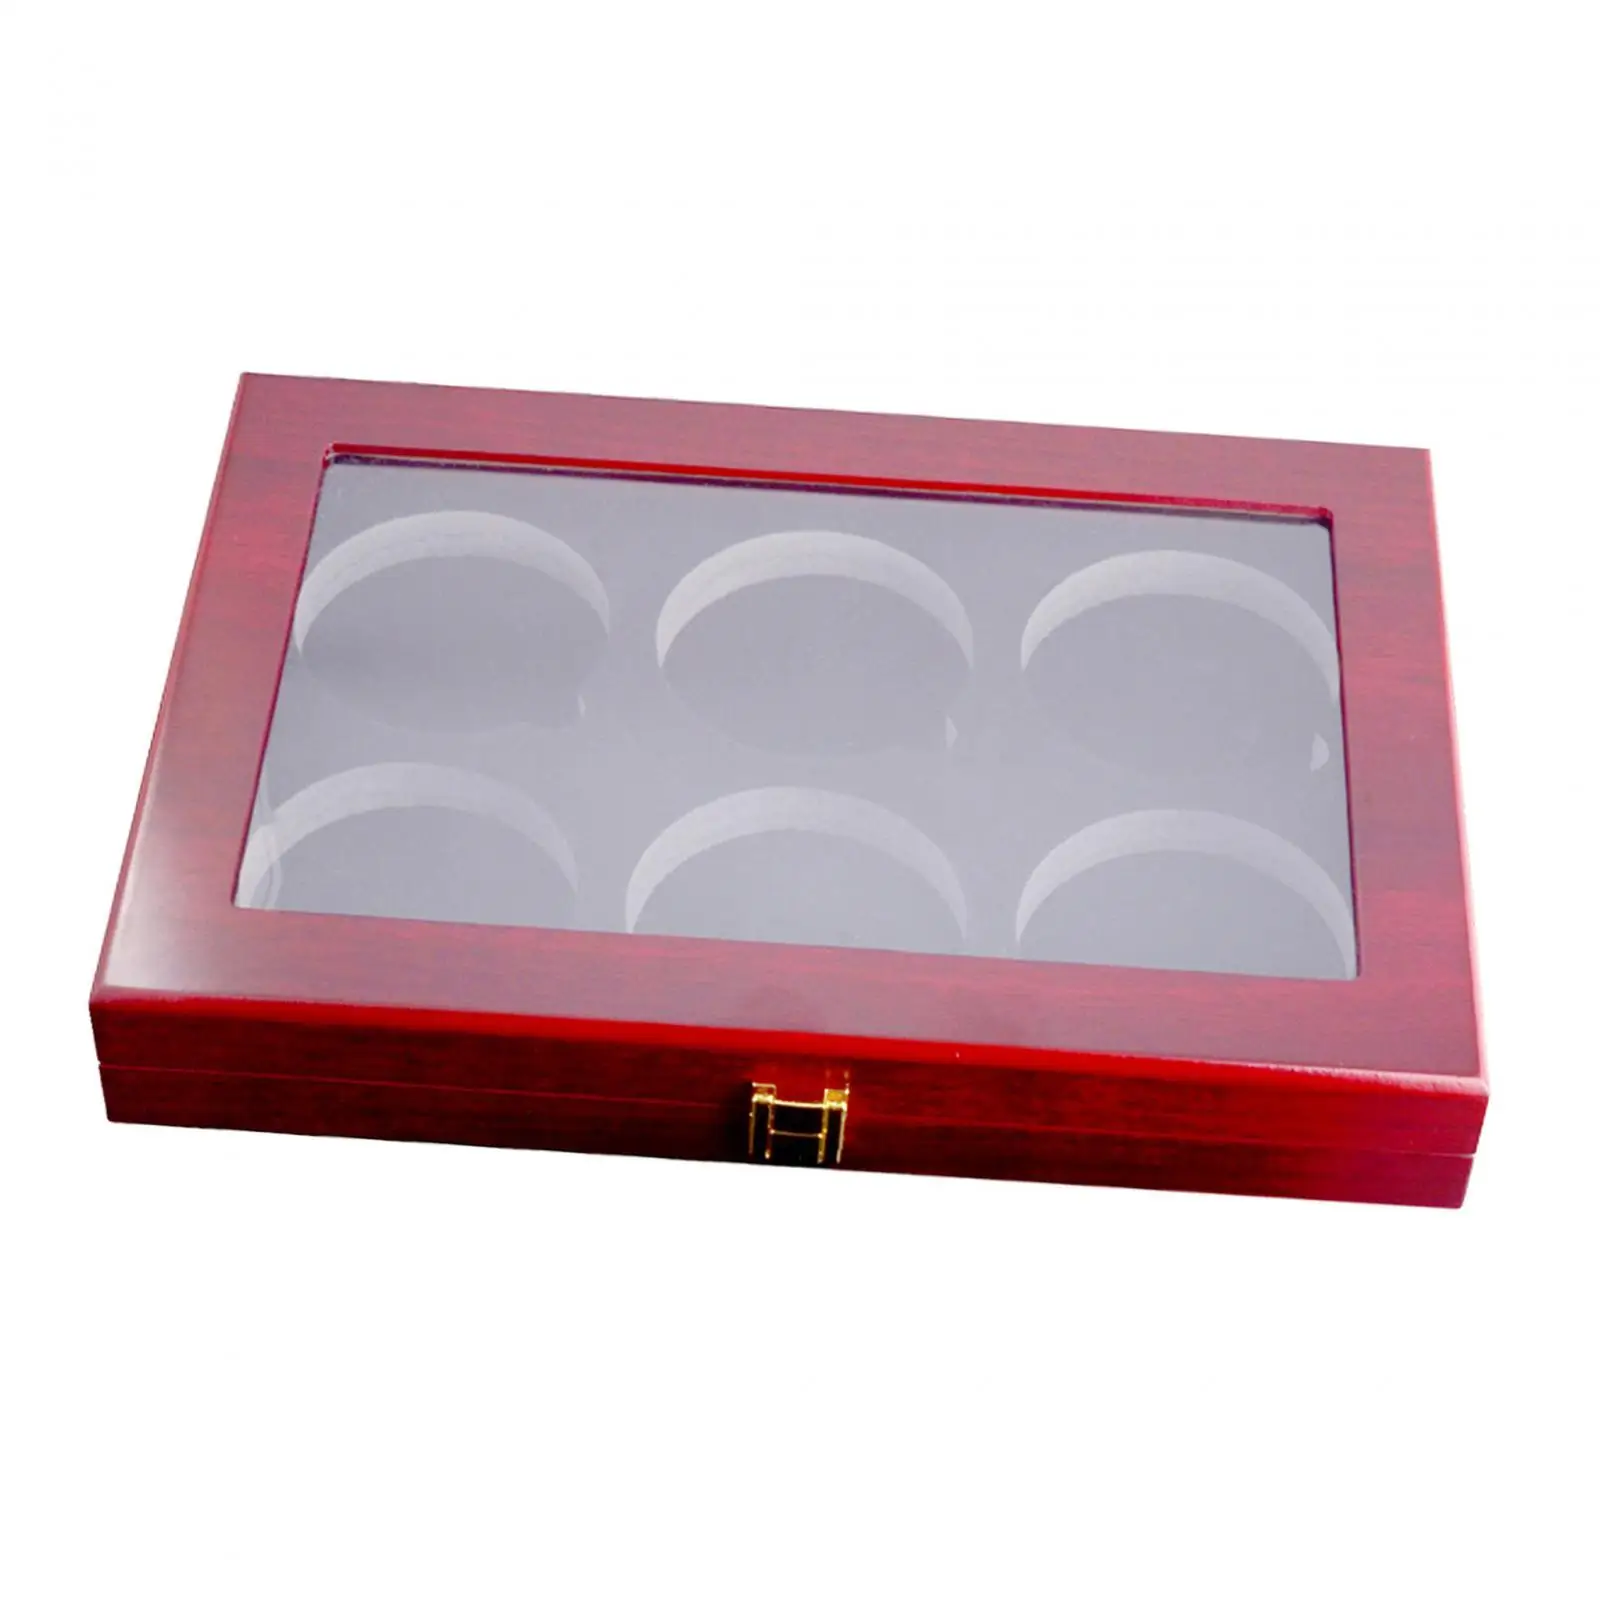 Hockey Puck Display Case Wood Dustproof Easy to Use with Protection Door Lockable Storage Cabinet Hockey Puck Case Puck Holder